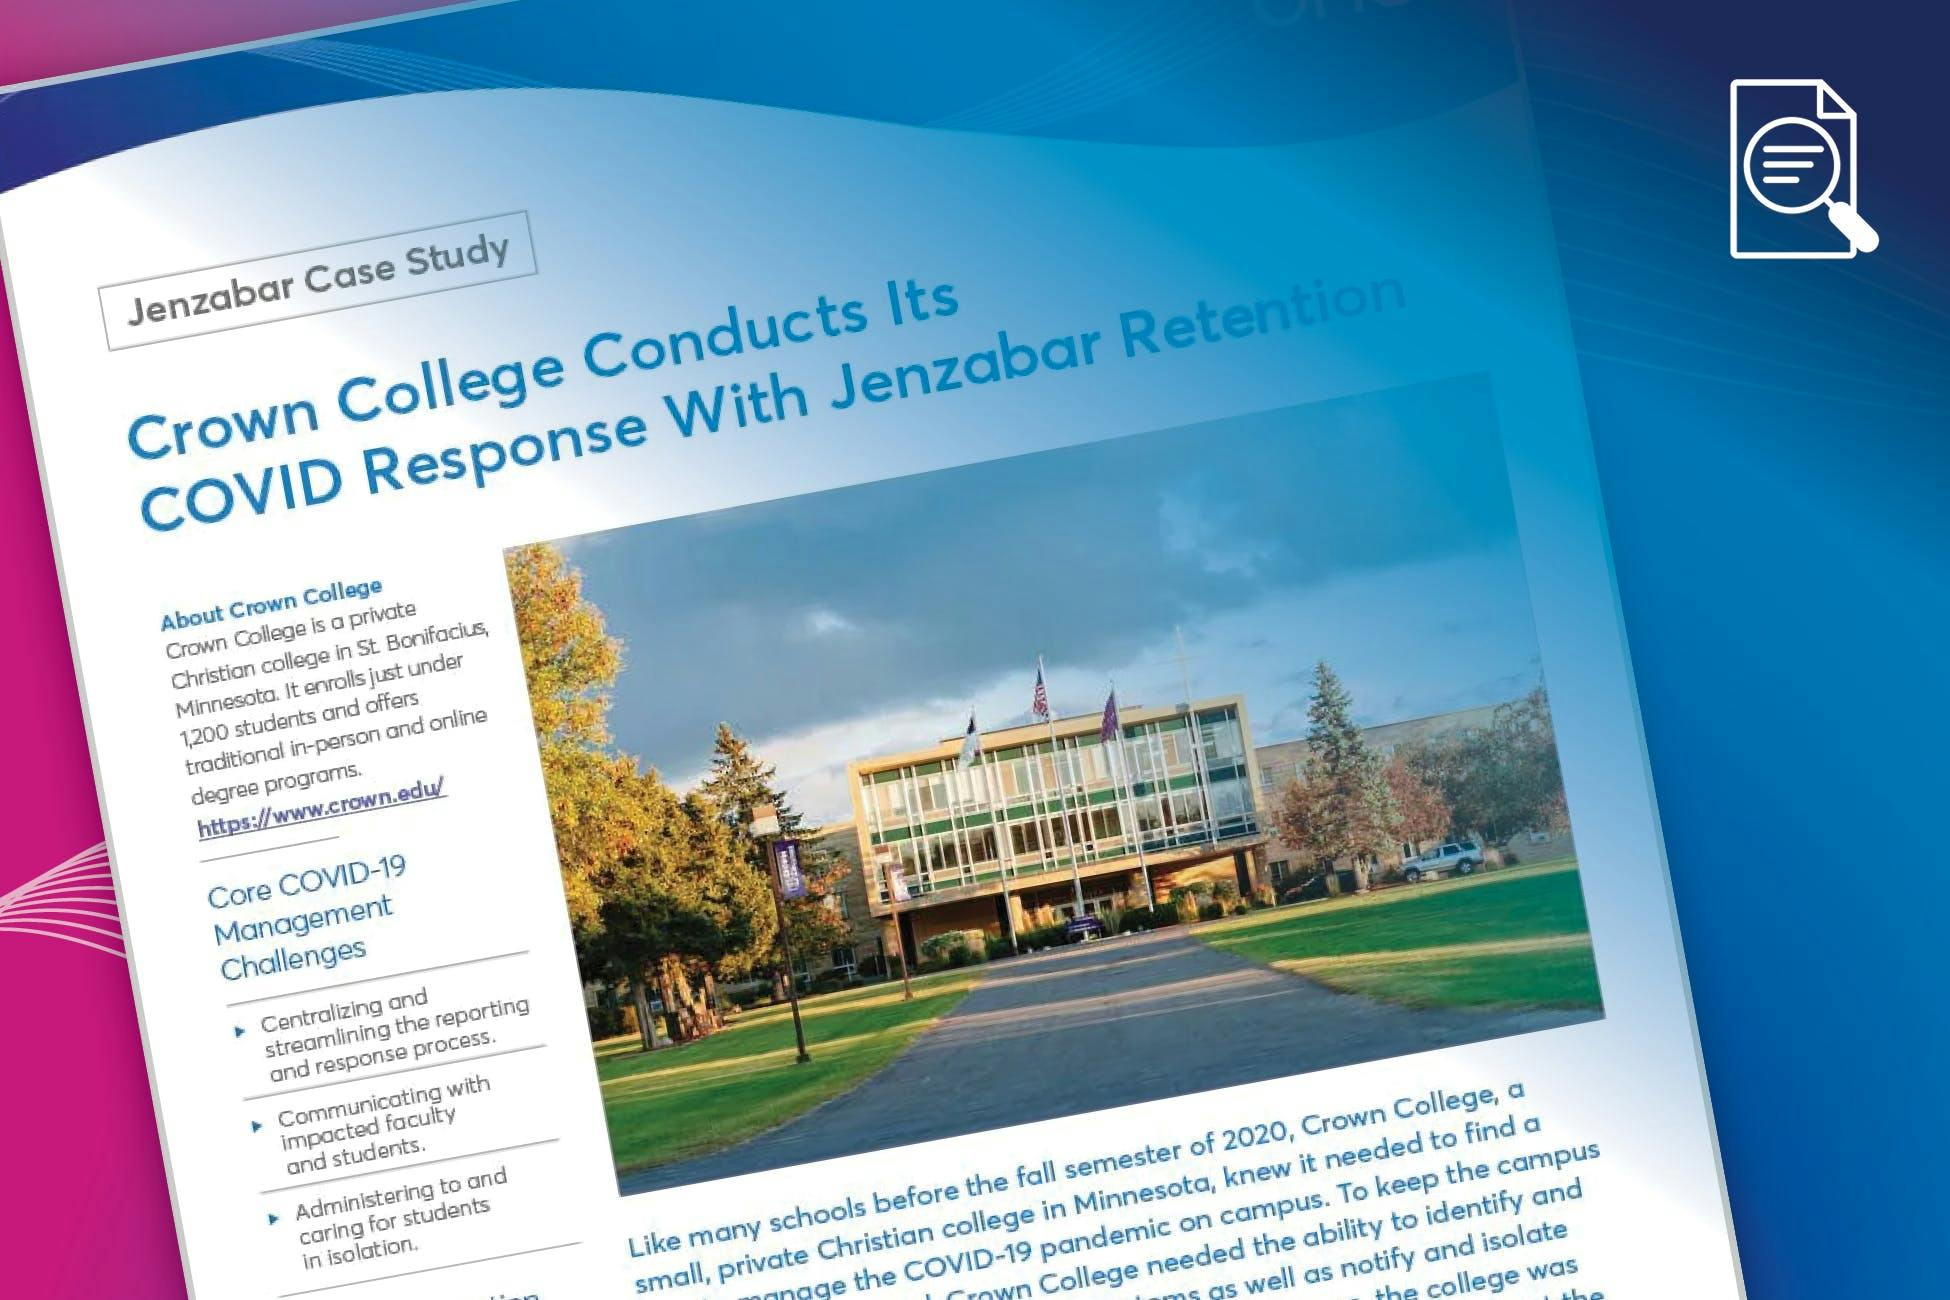 Case Study: Crown College Conducts Its COVID Response With Jenzabar Retention